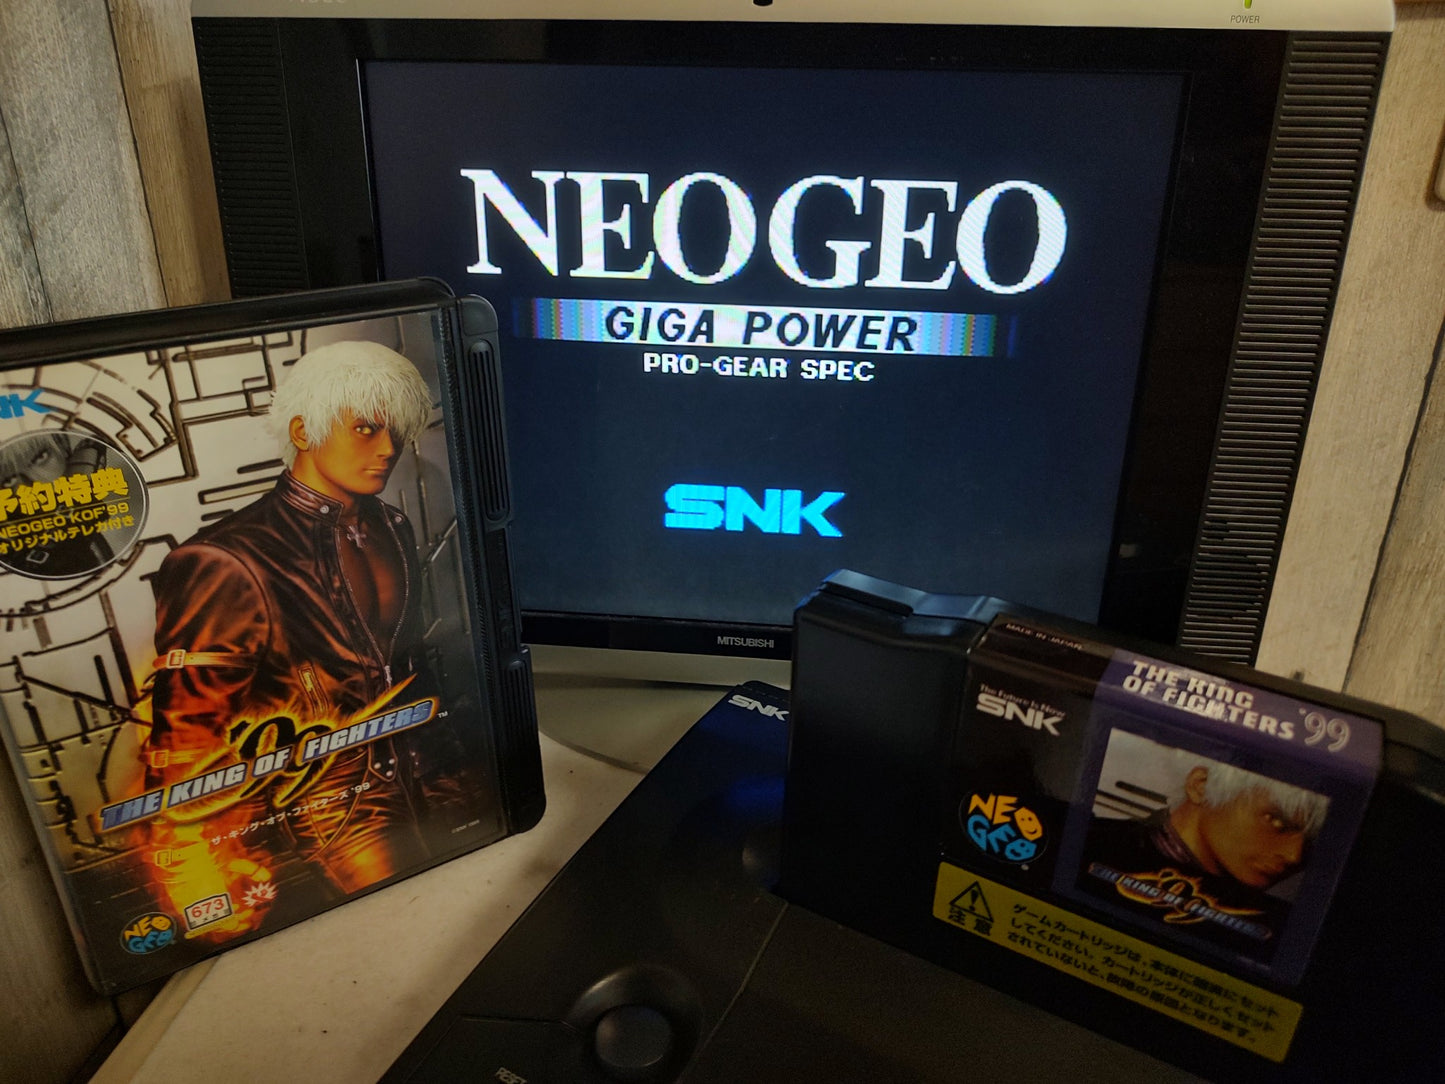 KOF 99 THE KING OF FIGHTERS 99 SNK NEO GEO AES w/Manual, Box, Working-f0504-4